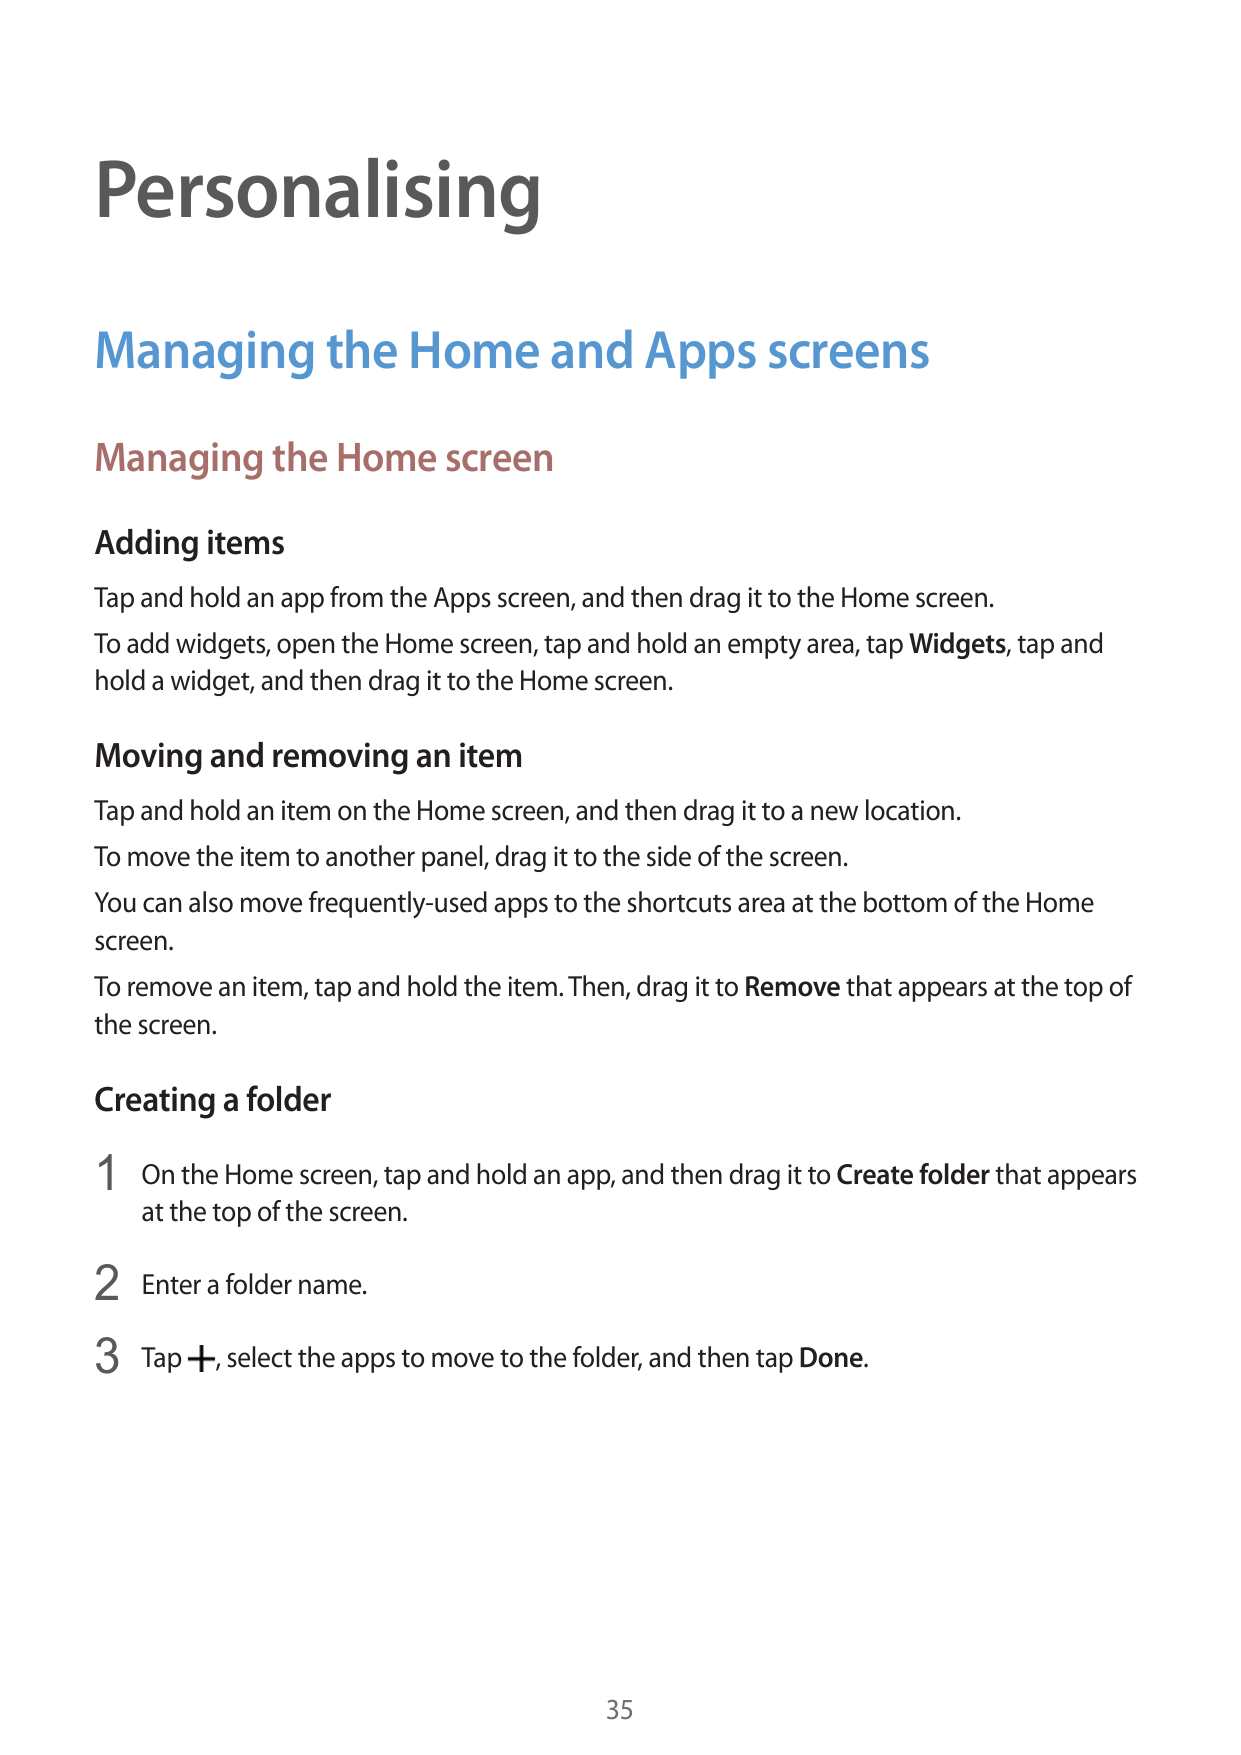 PersonalisingManaging the Home and Apps screensManaging the Home screenAdding itemsTap and hold an app from the Apps screen, and